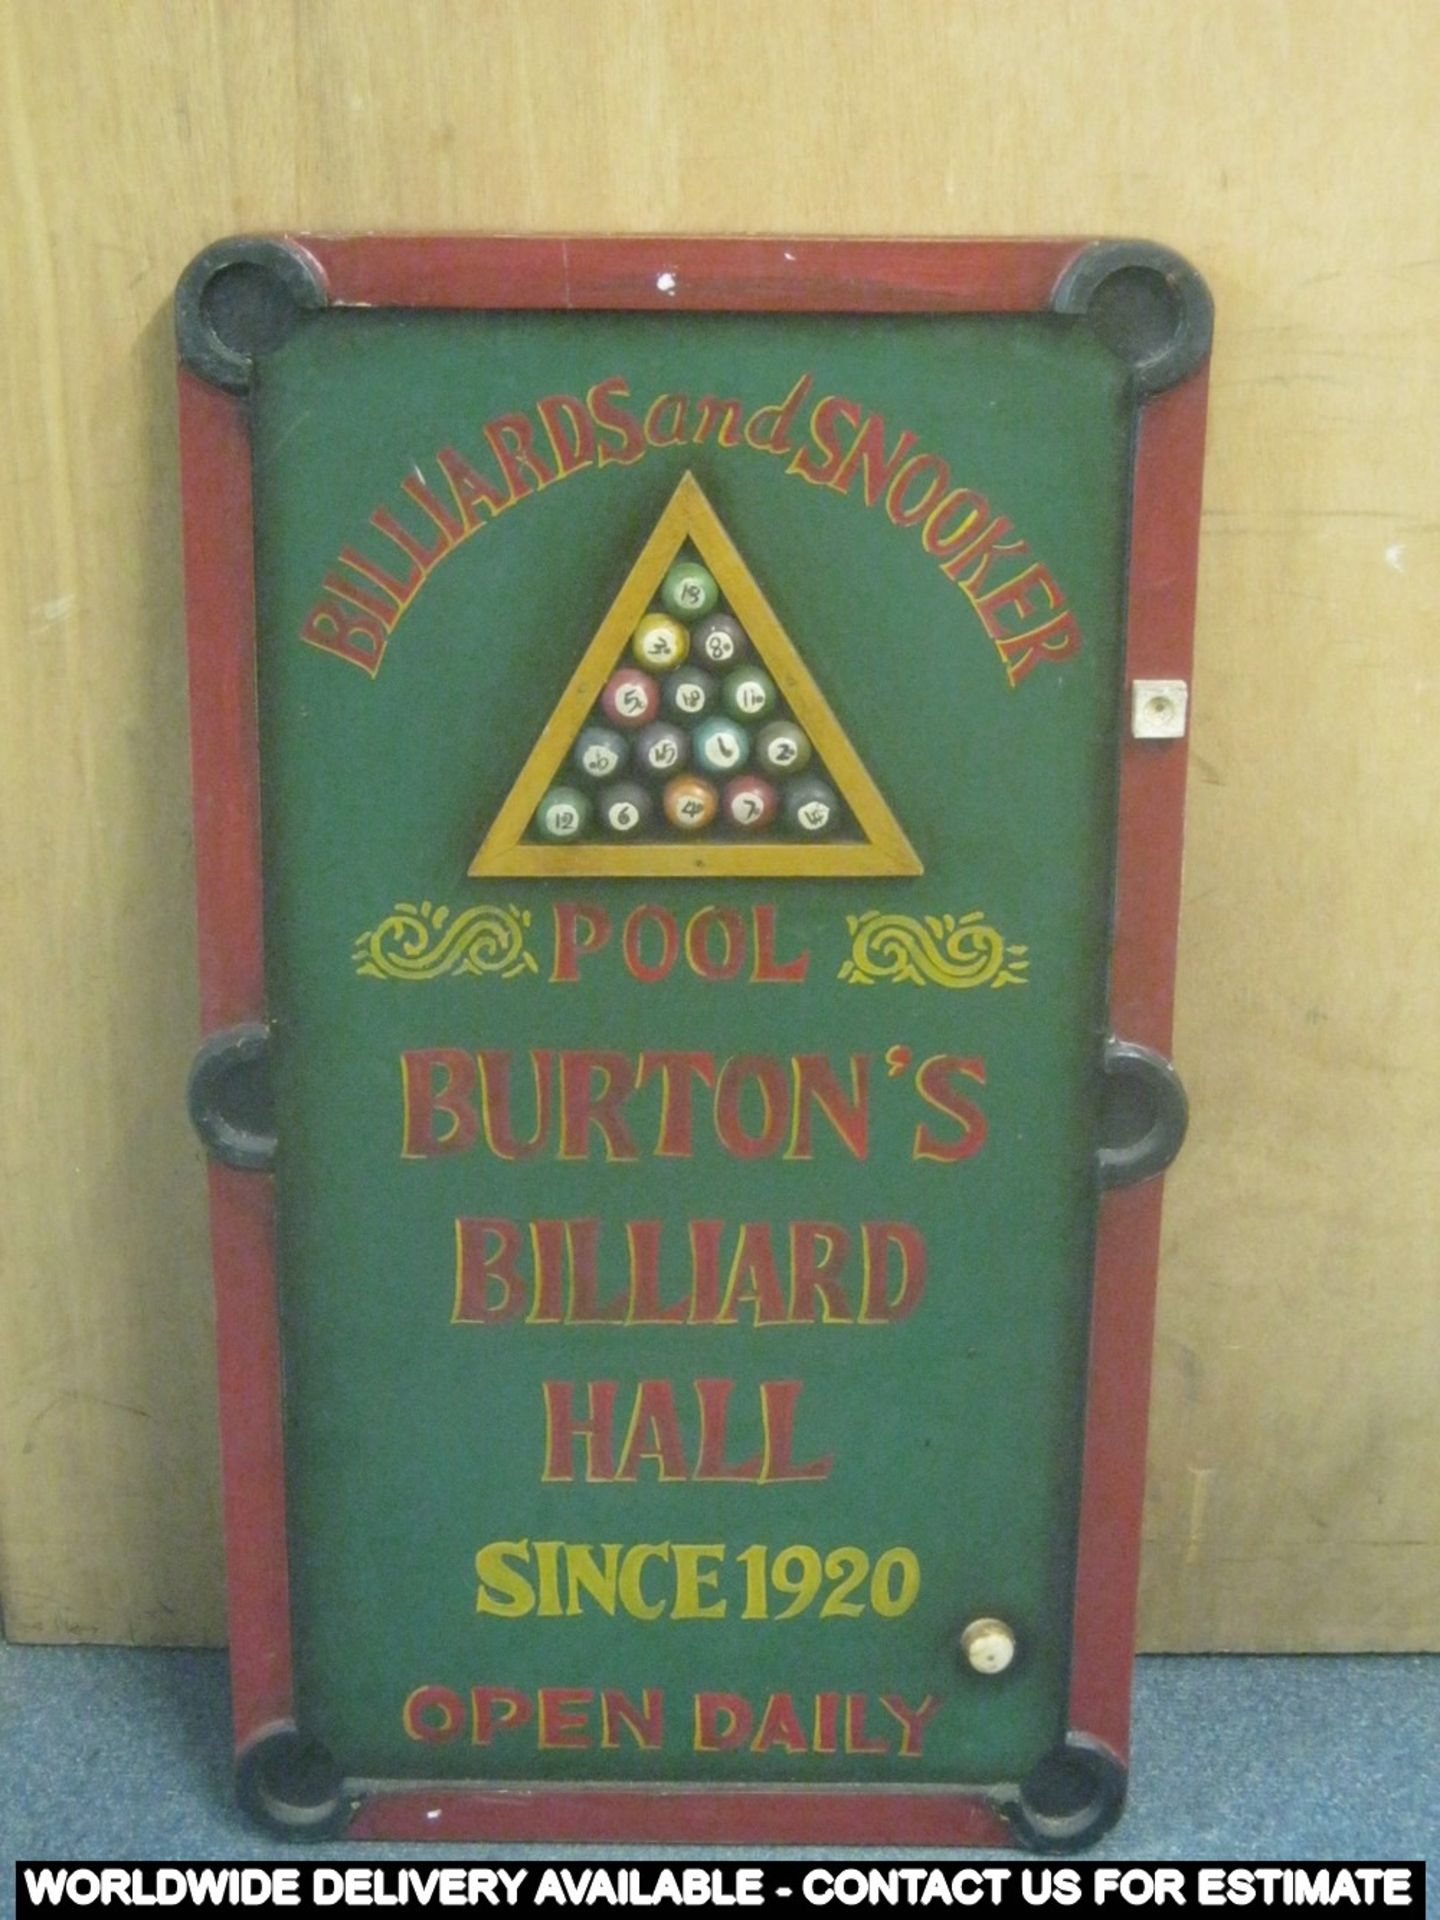 A wooden relief "Billiards and Snooker" sign